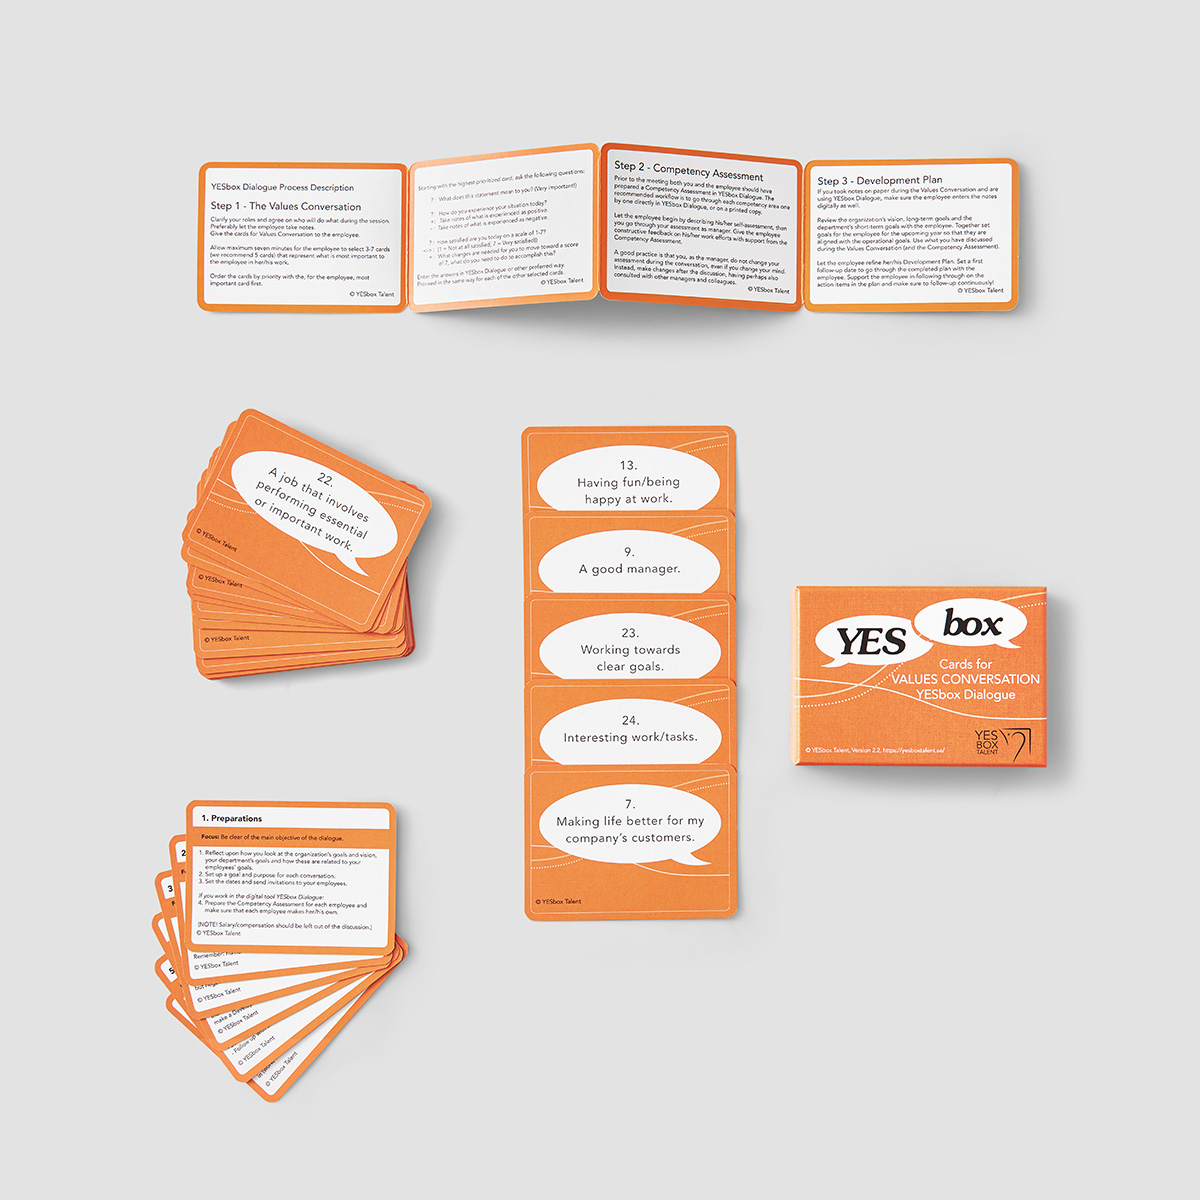 YESbox – Cards for value conversations